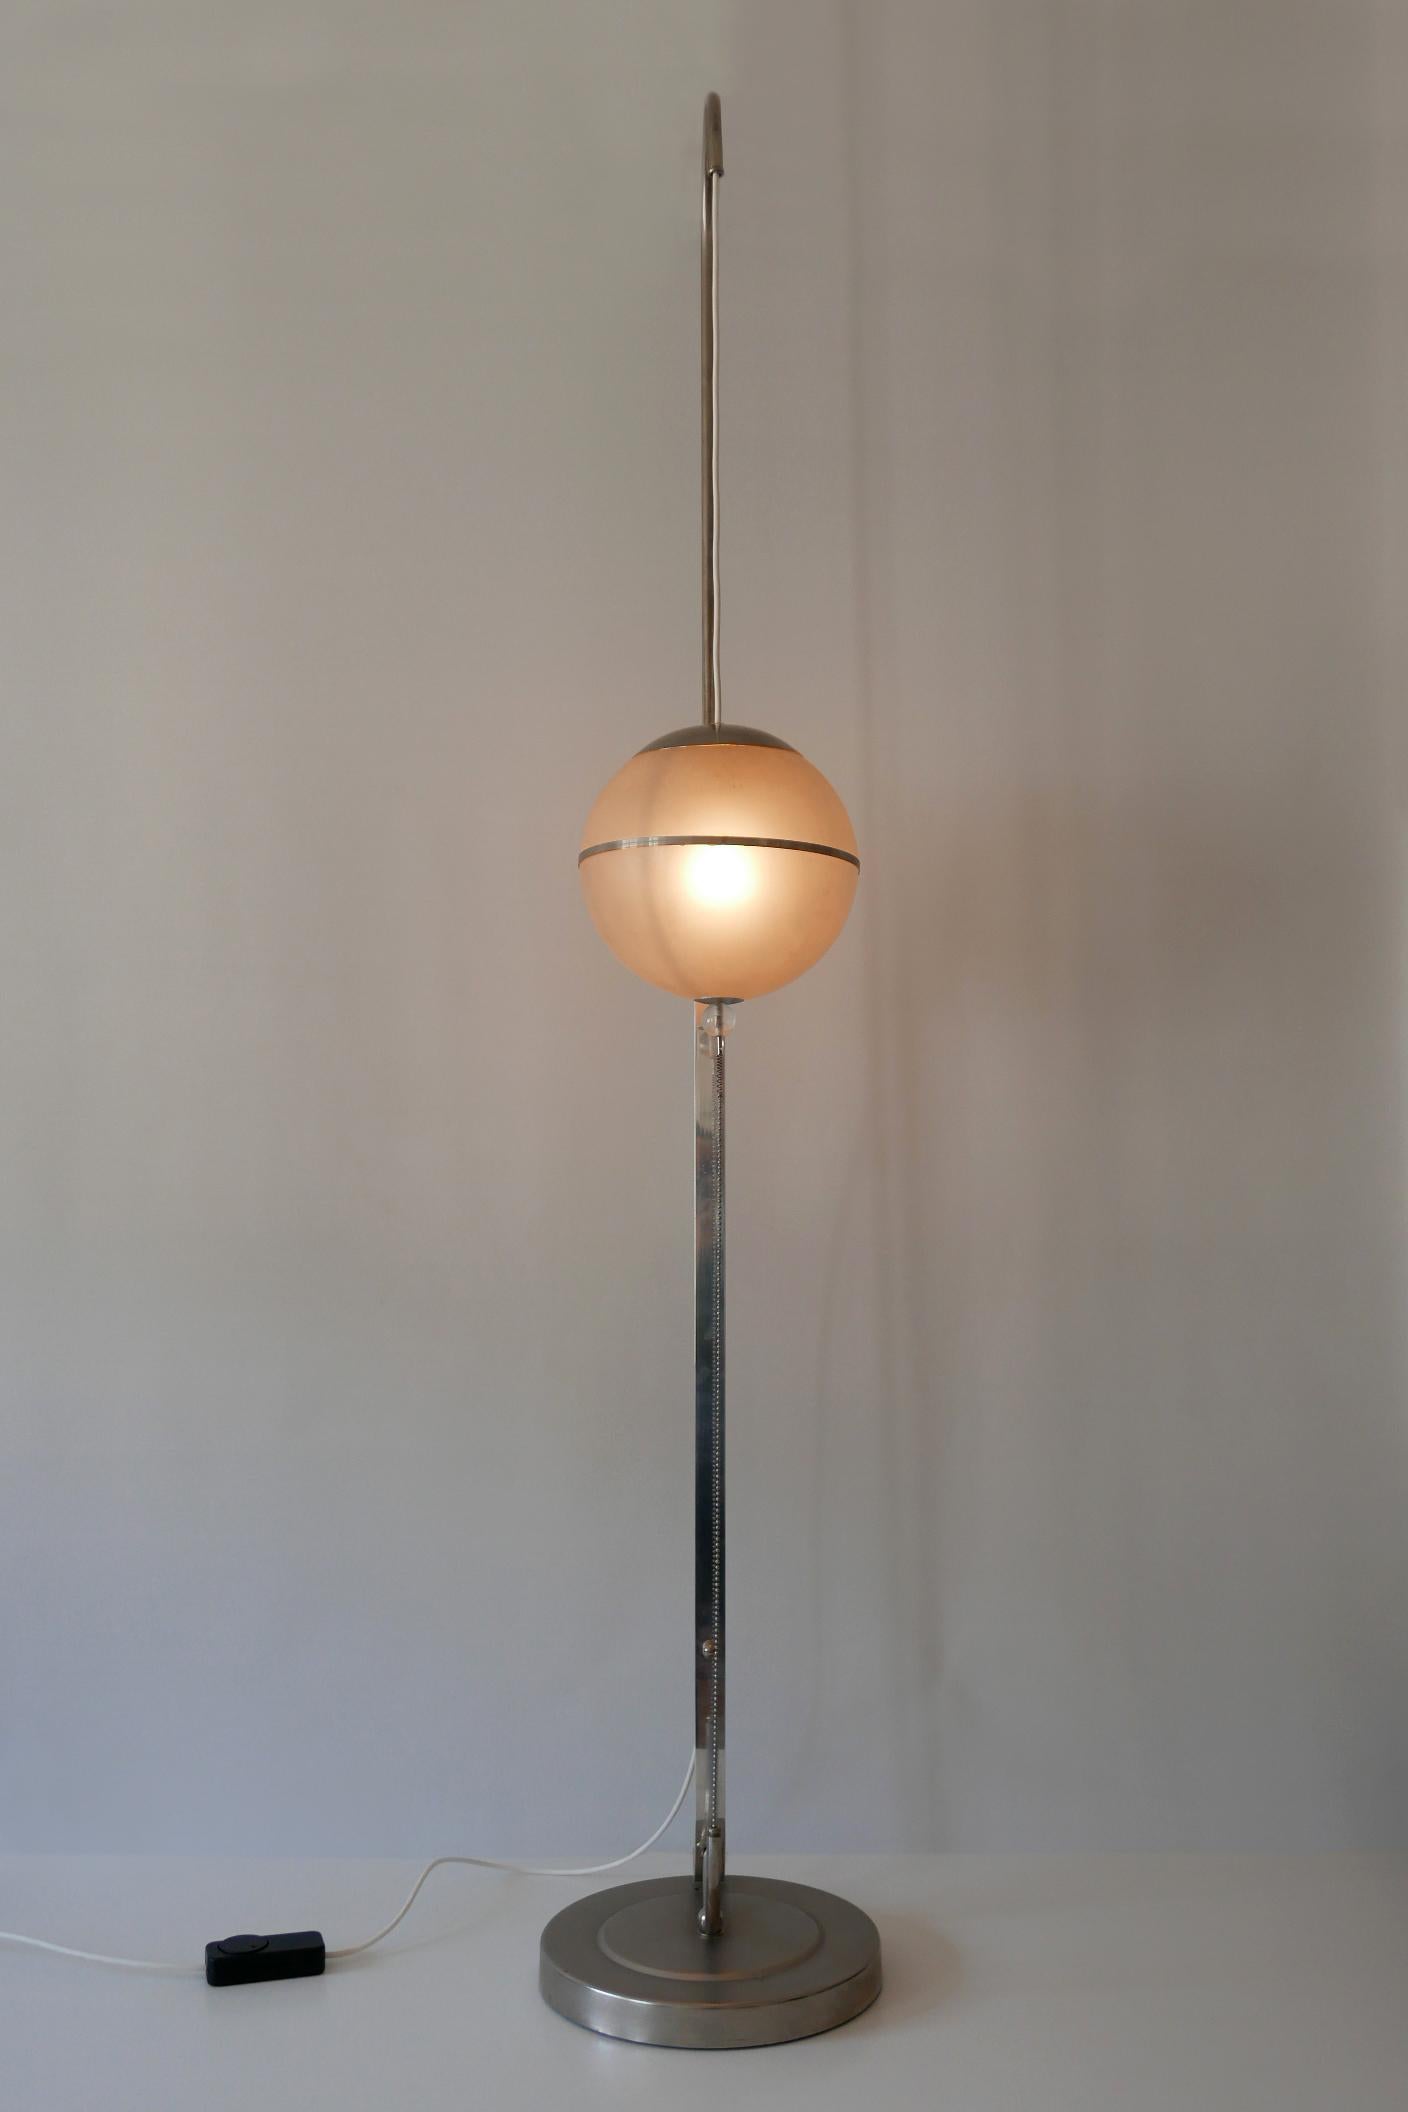 Bauhaus Floor Lamp by Karl Trabert for Schanzenbach & Co 1930s Germany For Sale 2